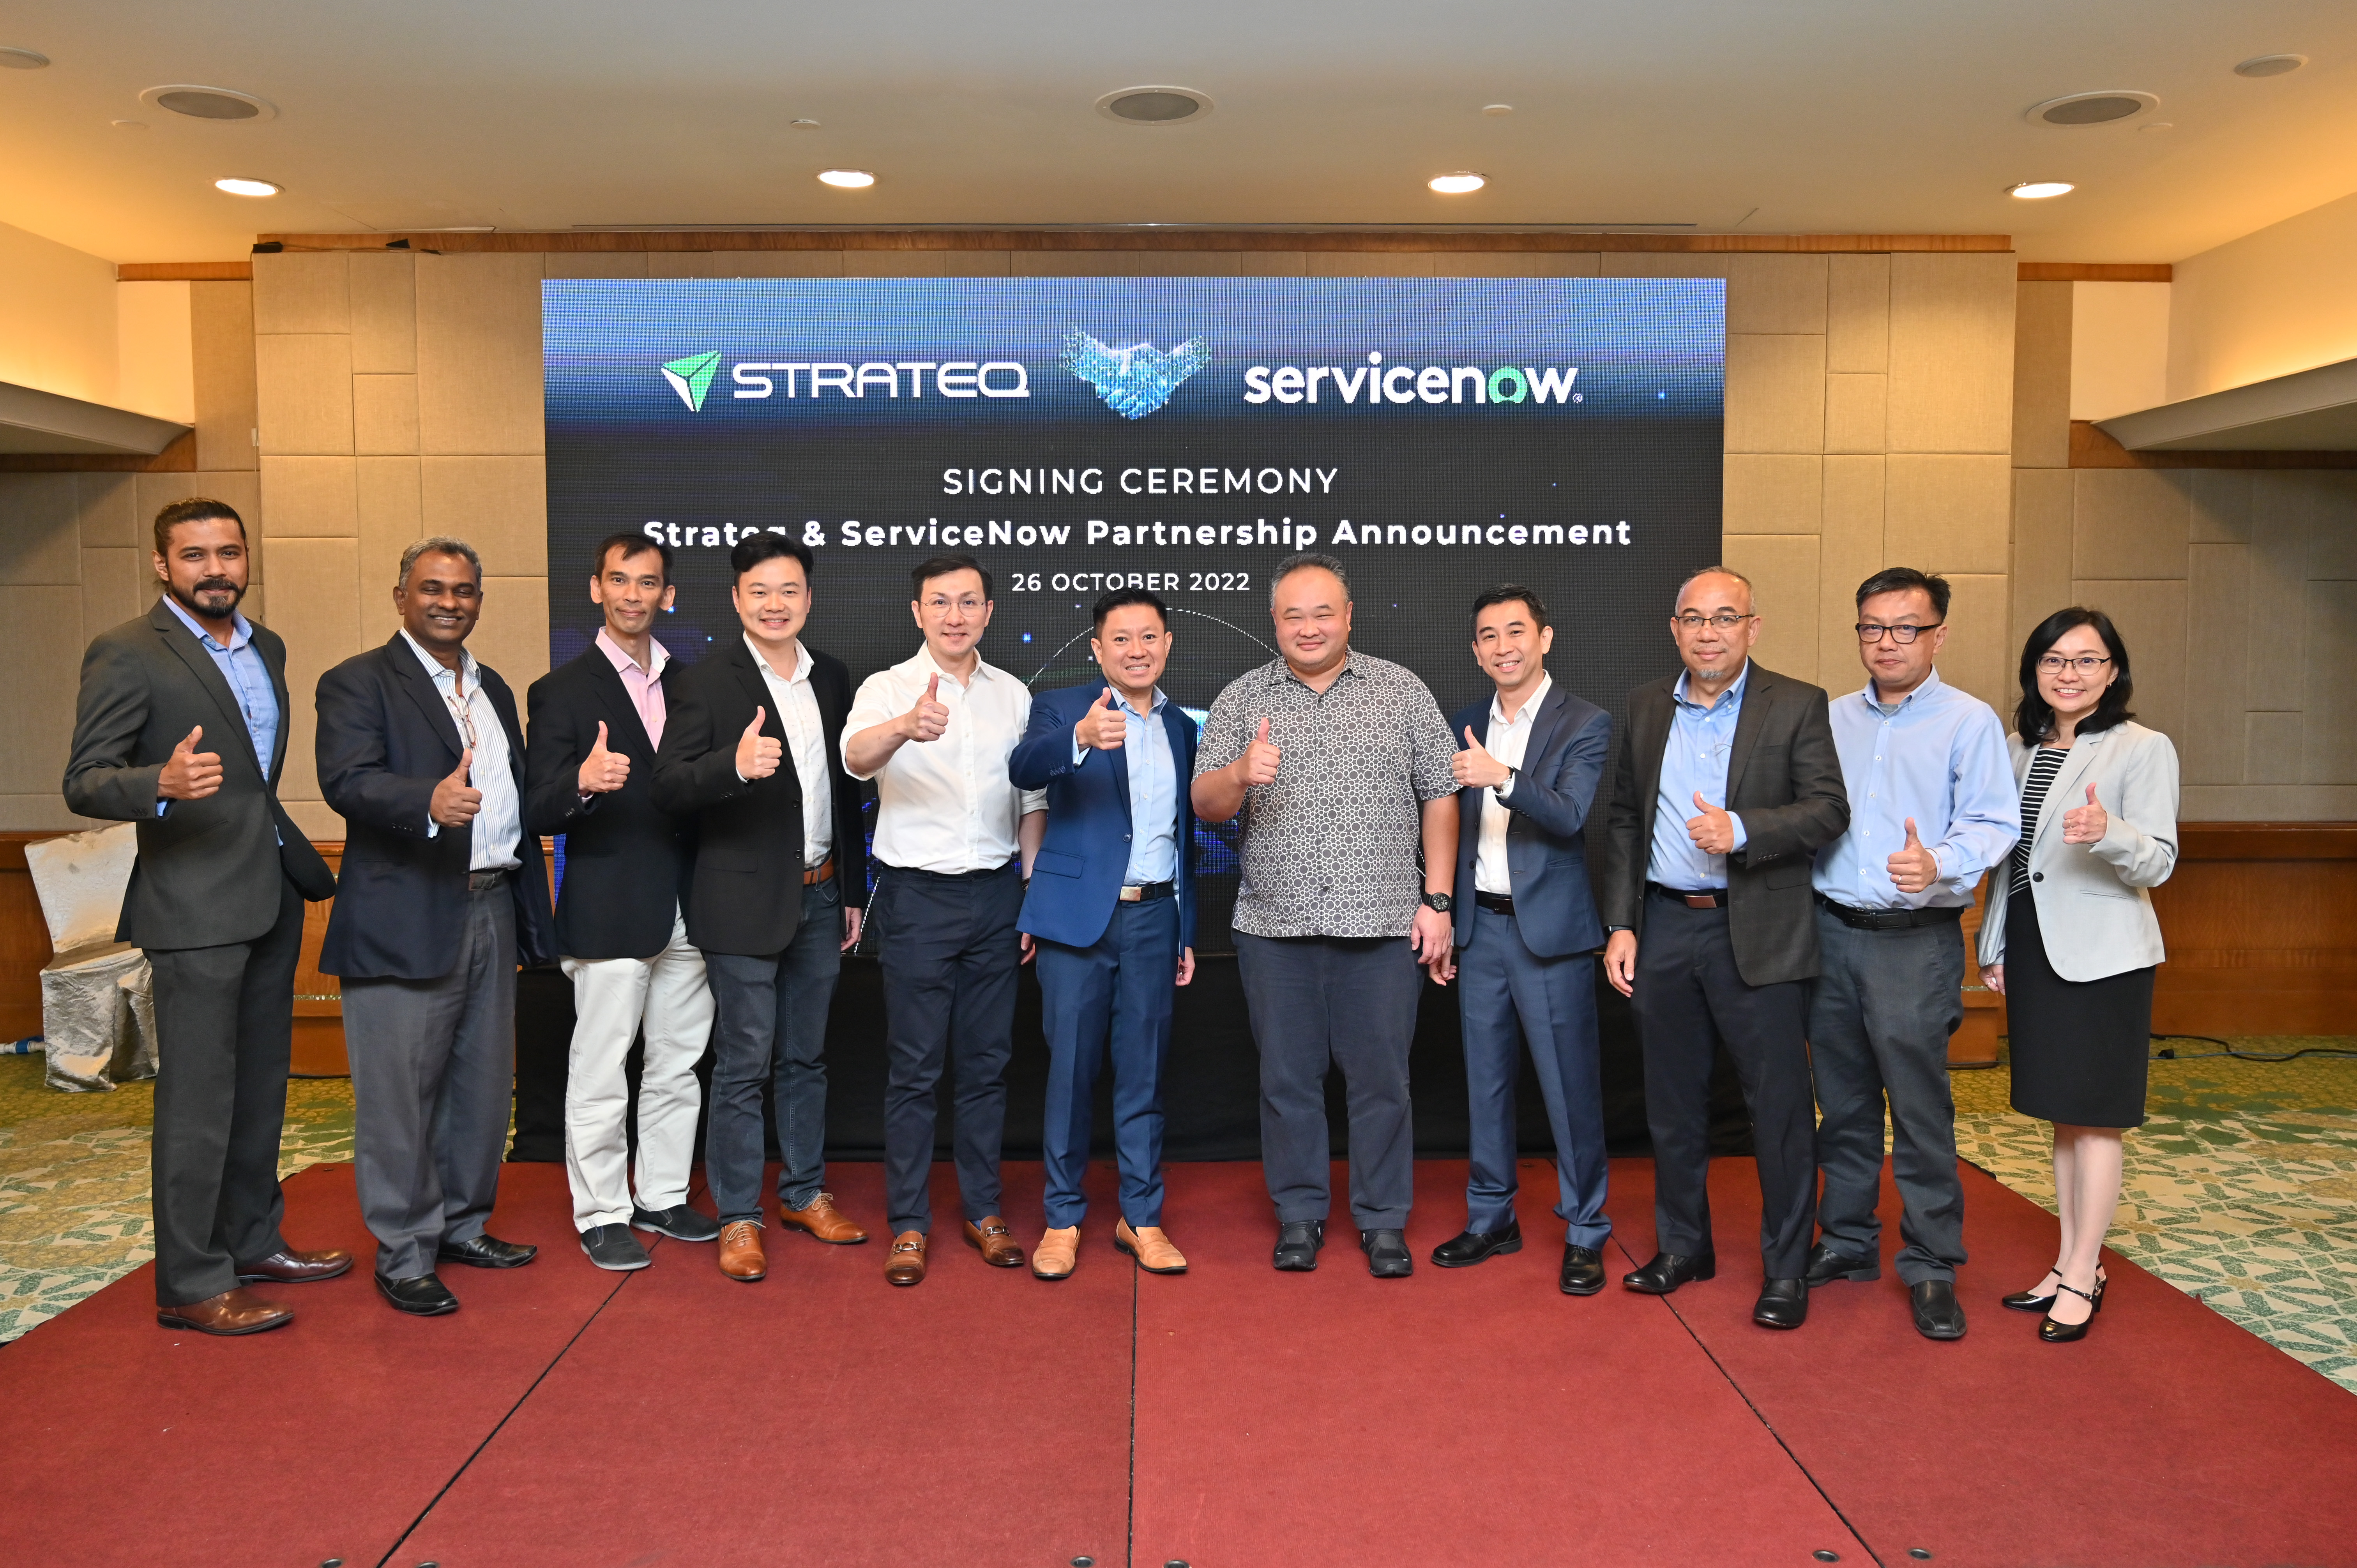 Representatives of Strateq and ServiceNow during the collaboration announcement. Tan Seng Kit, Strateq group MD of Strateq is 5th from right.